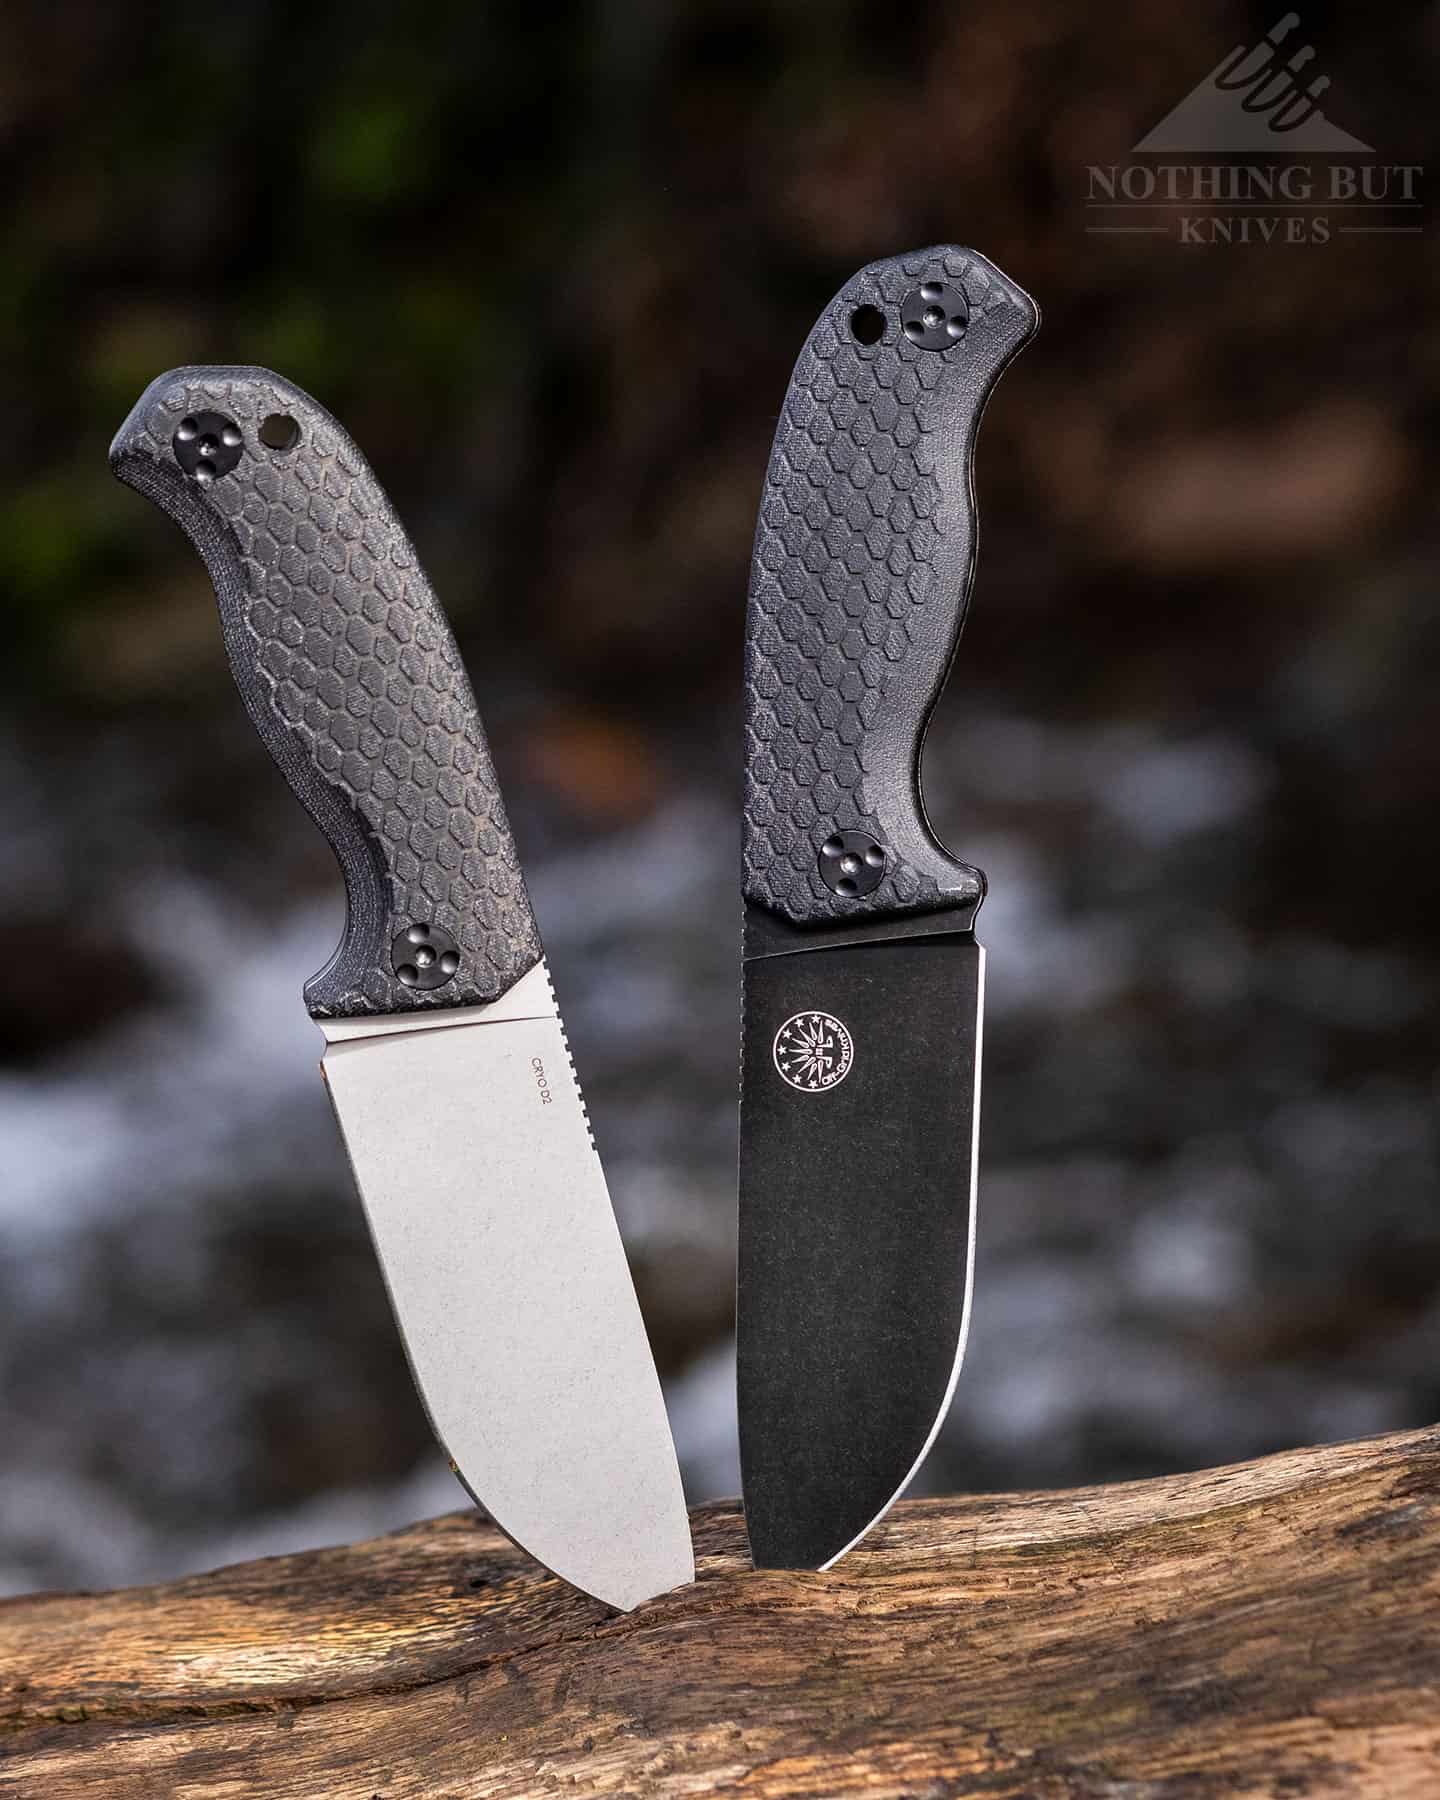 The all new Off-Grid Tracker-X2 comes with a stonewashed blade or a  blackout blade.